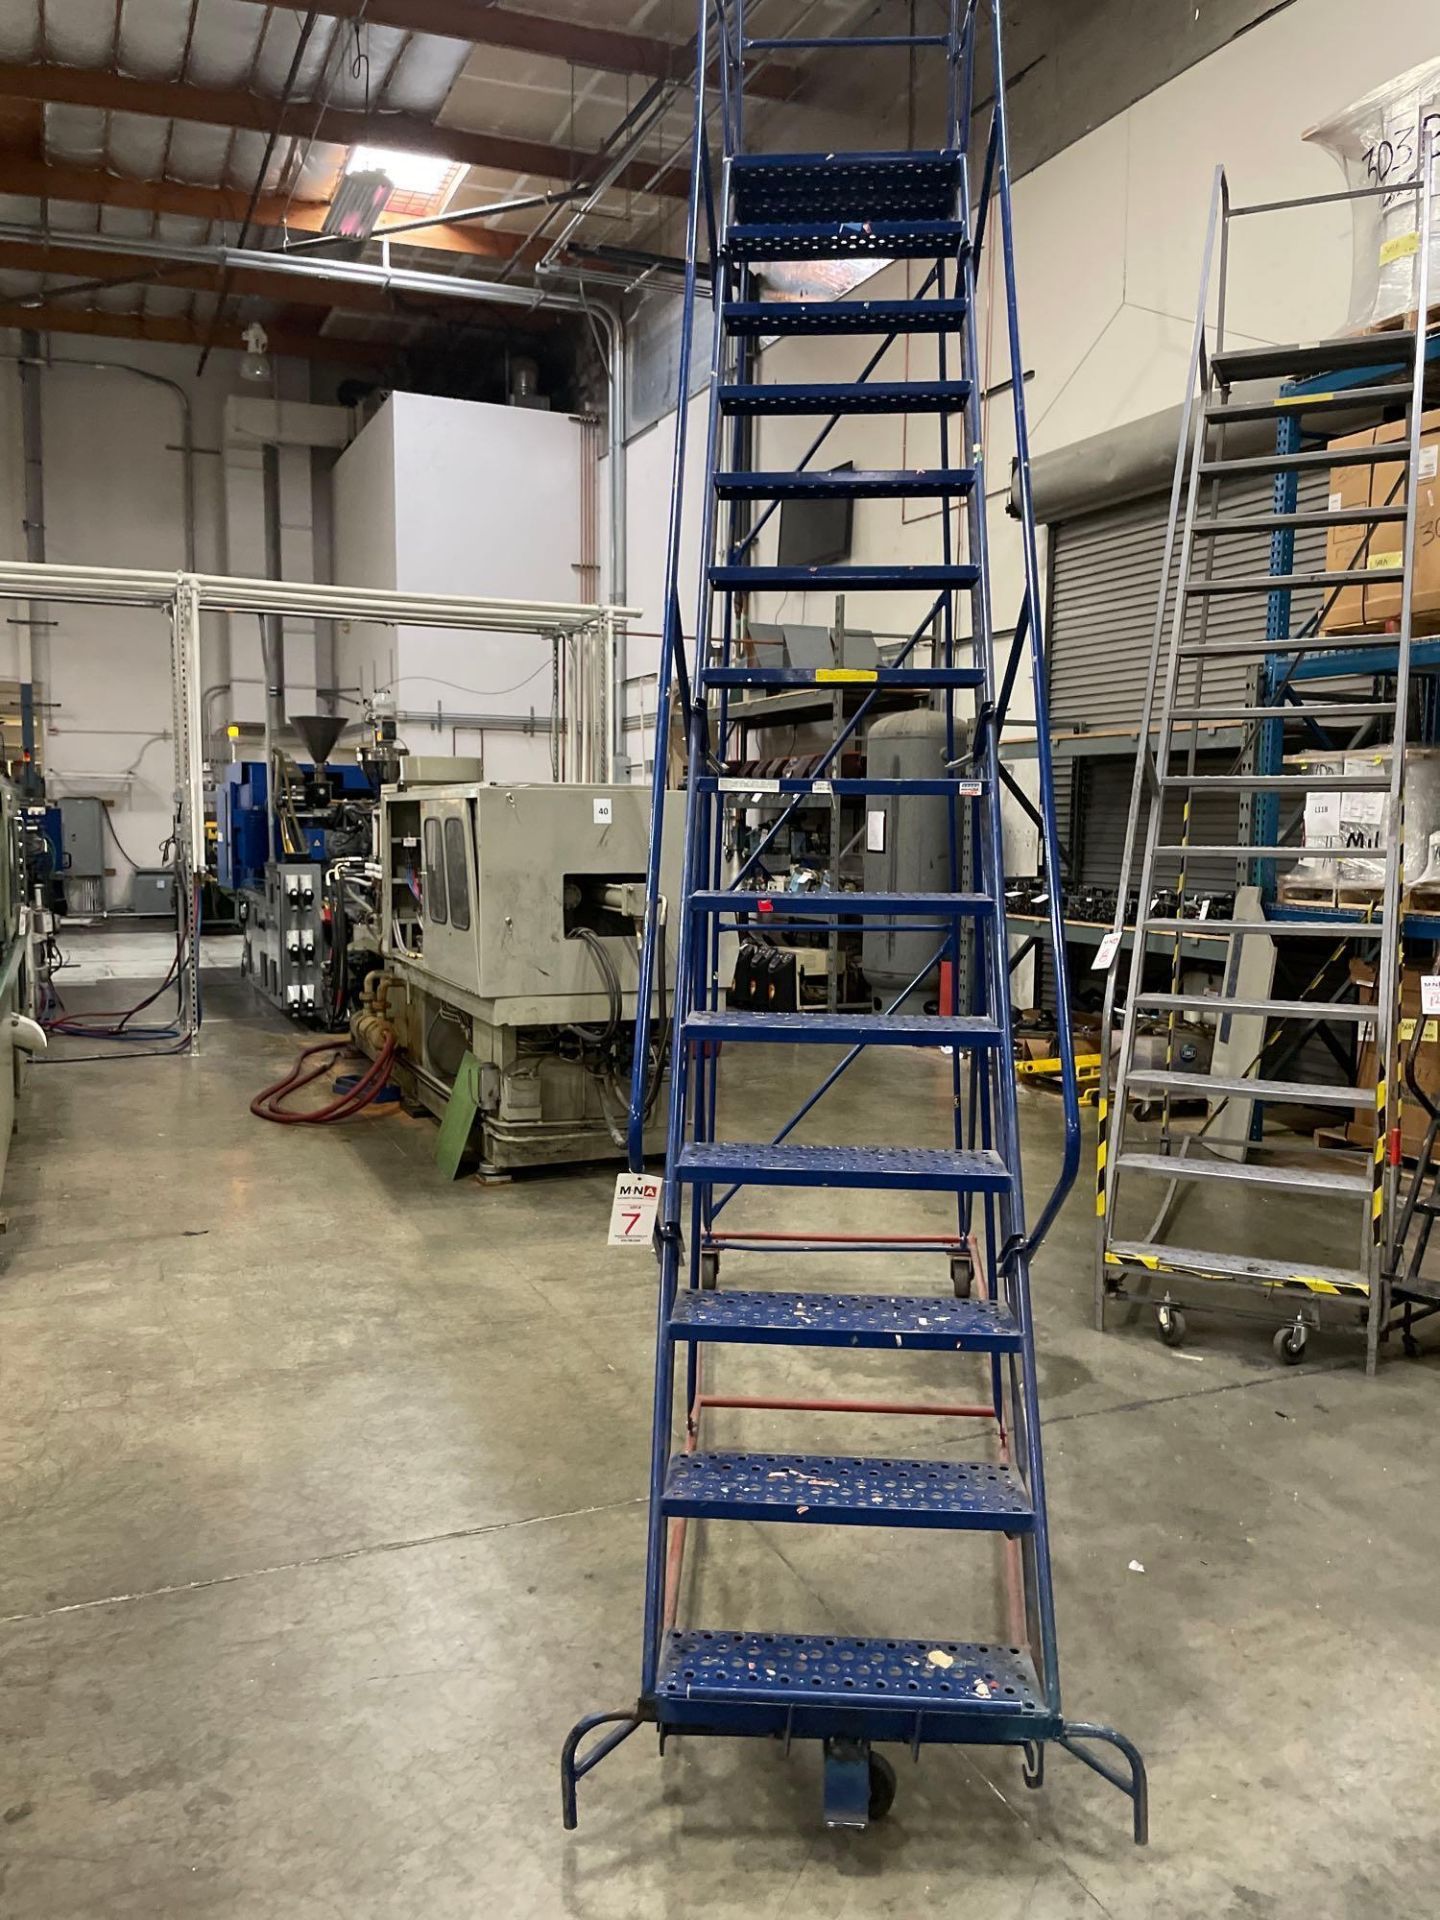 15 Step Rolling Warehouse Ladder - Image 3 of 4